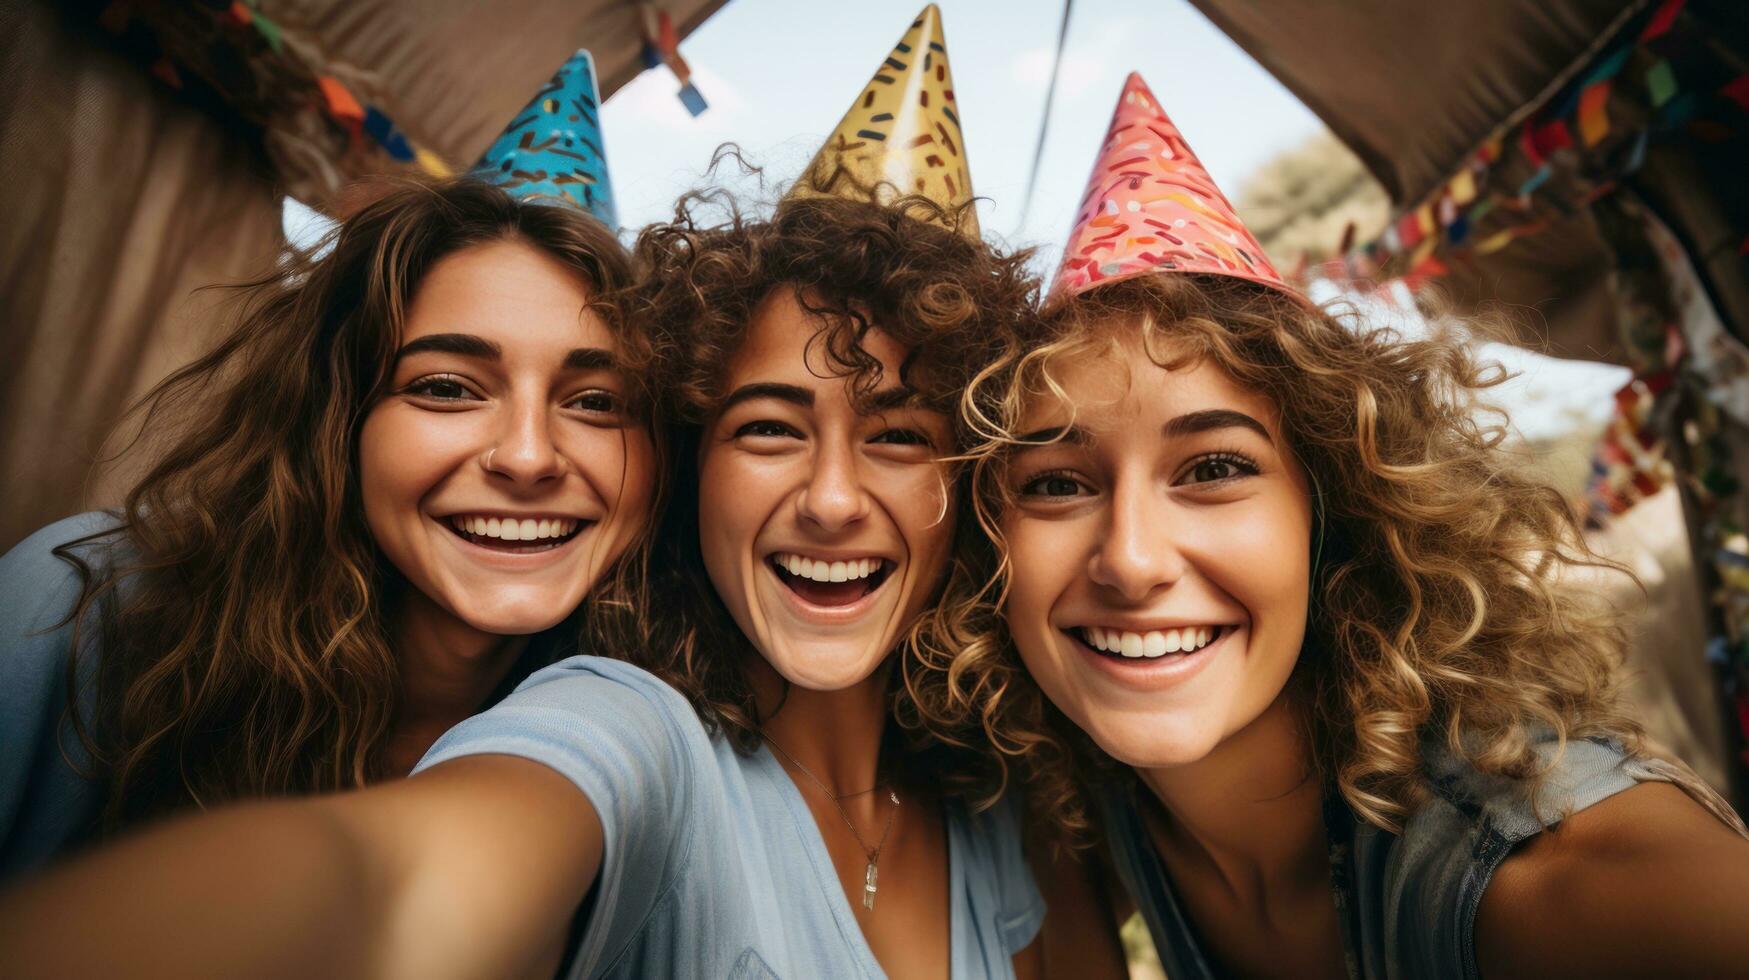 Friends taking a selfie with party hats photo